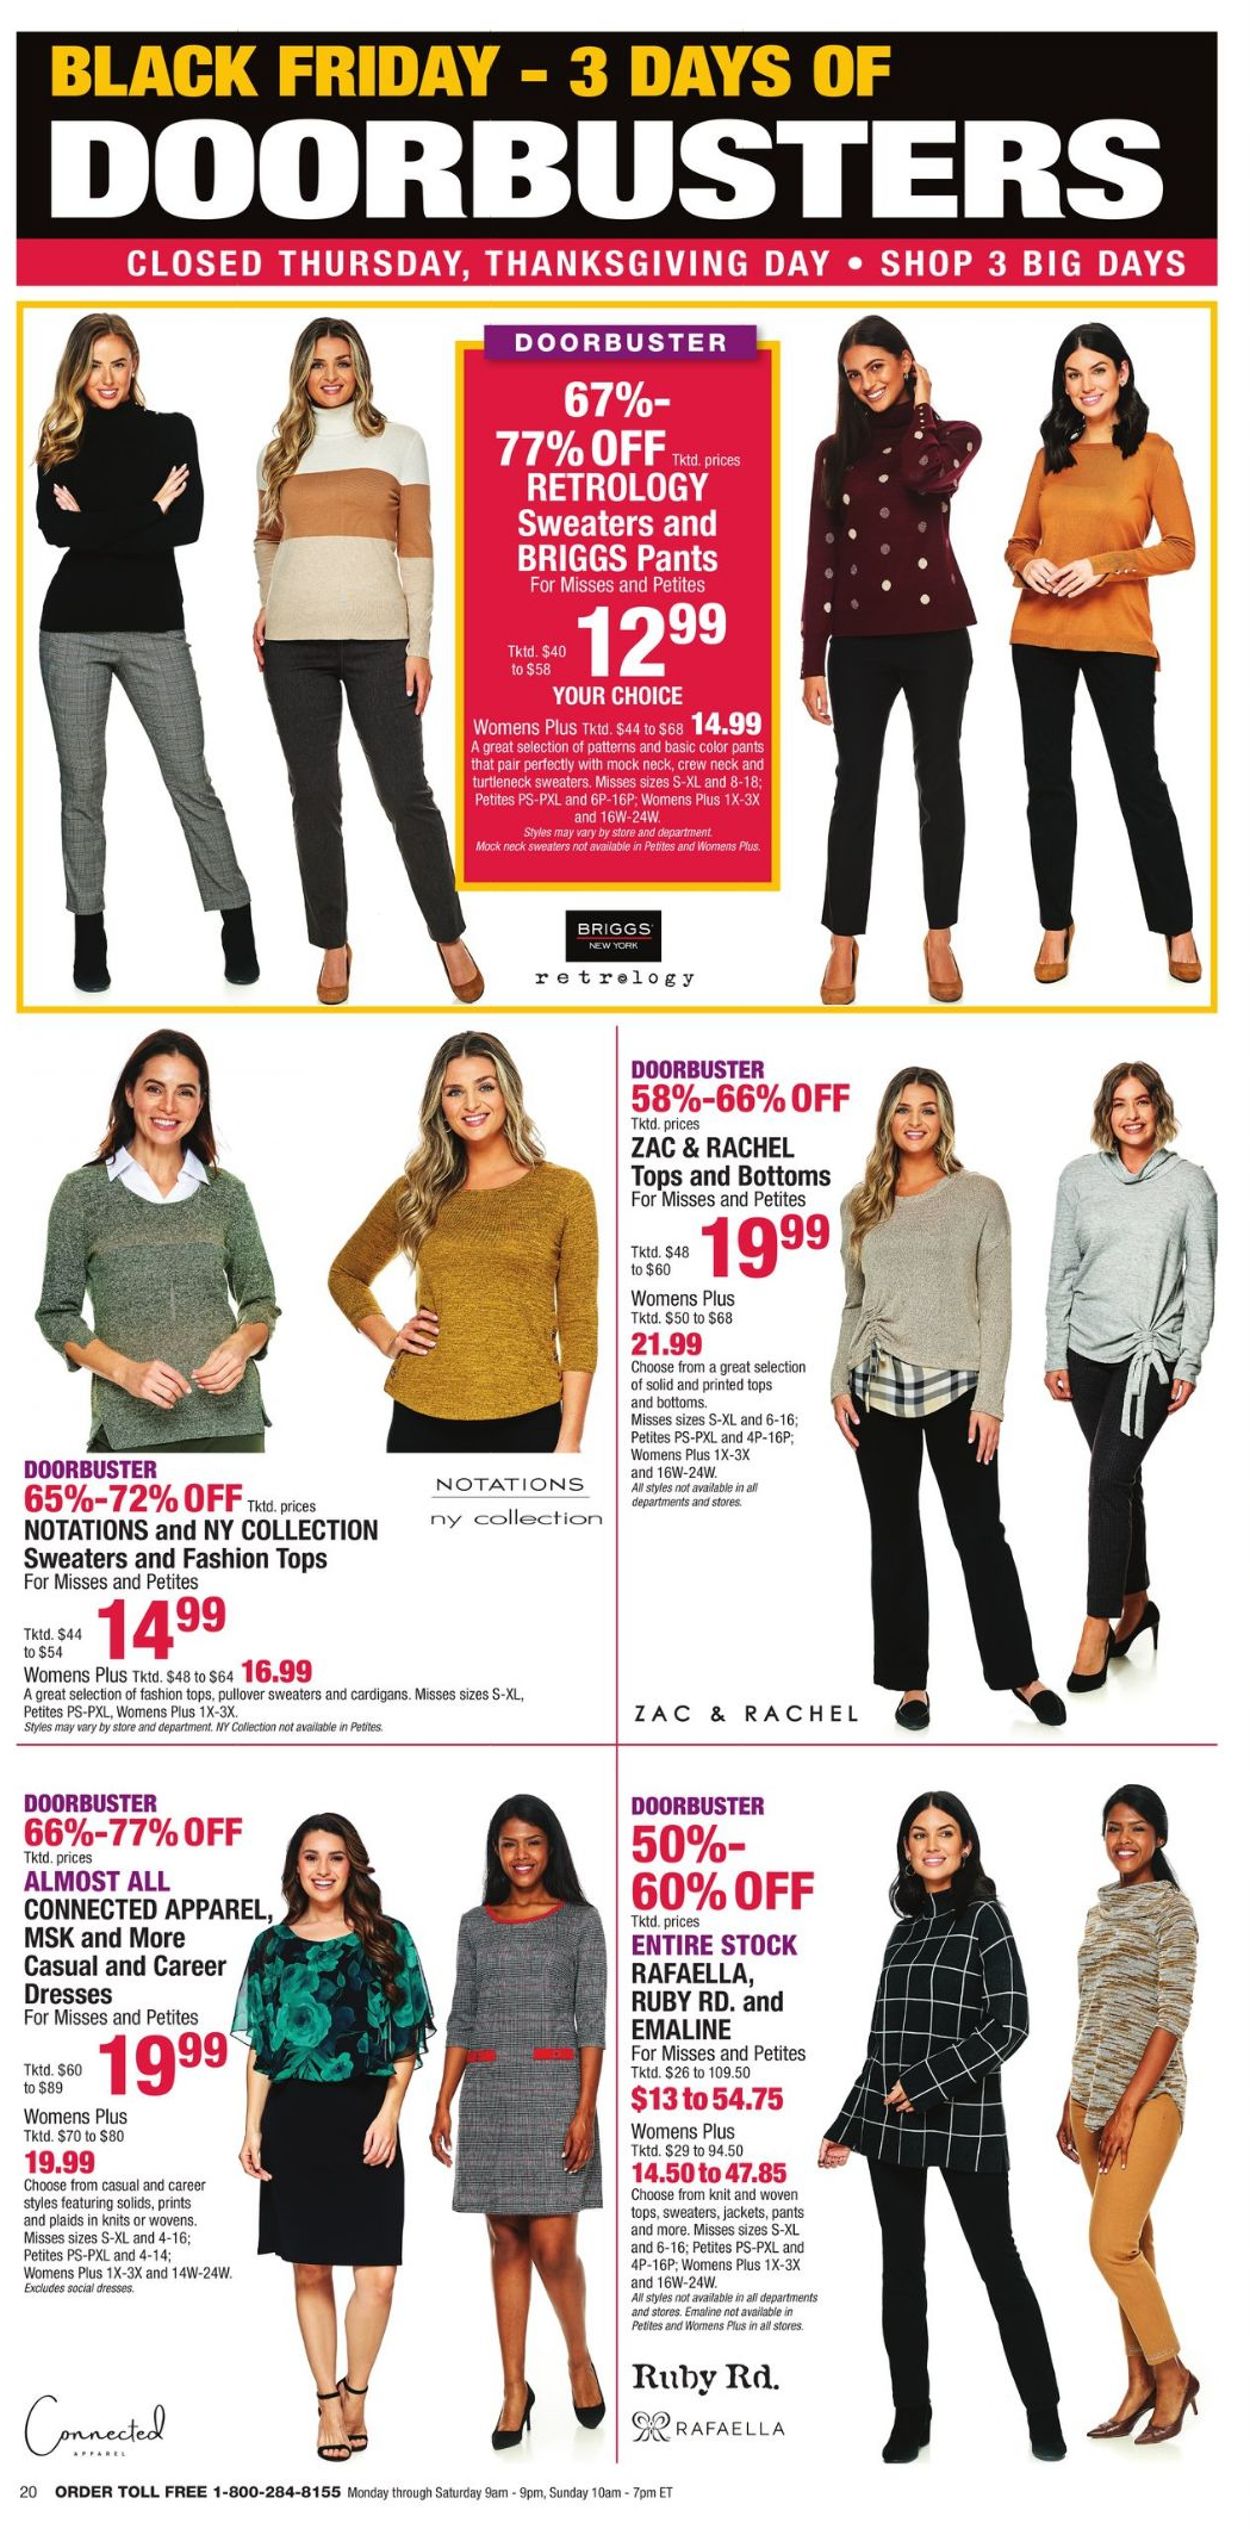 Catalogue Boscov's Thanksgiving Sale 2020 from 11/25/2020